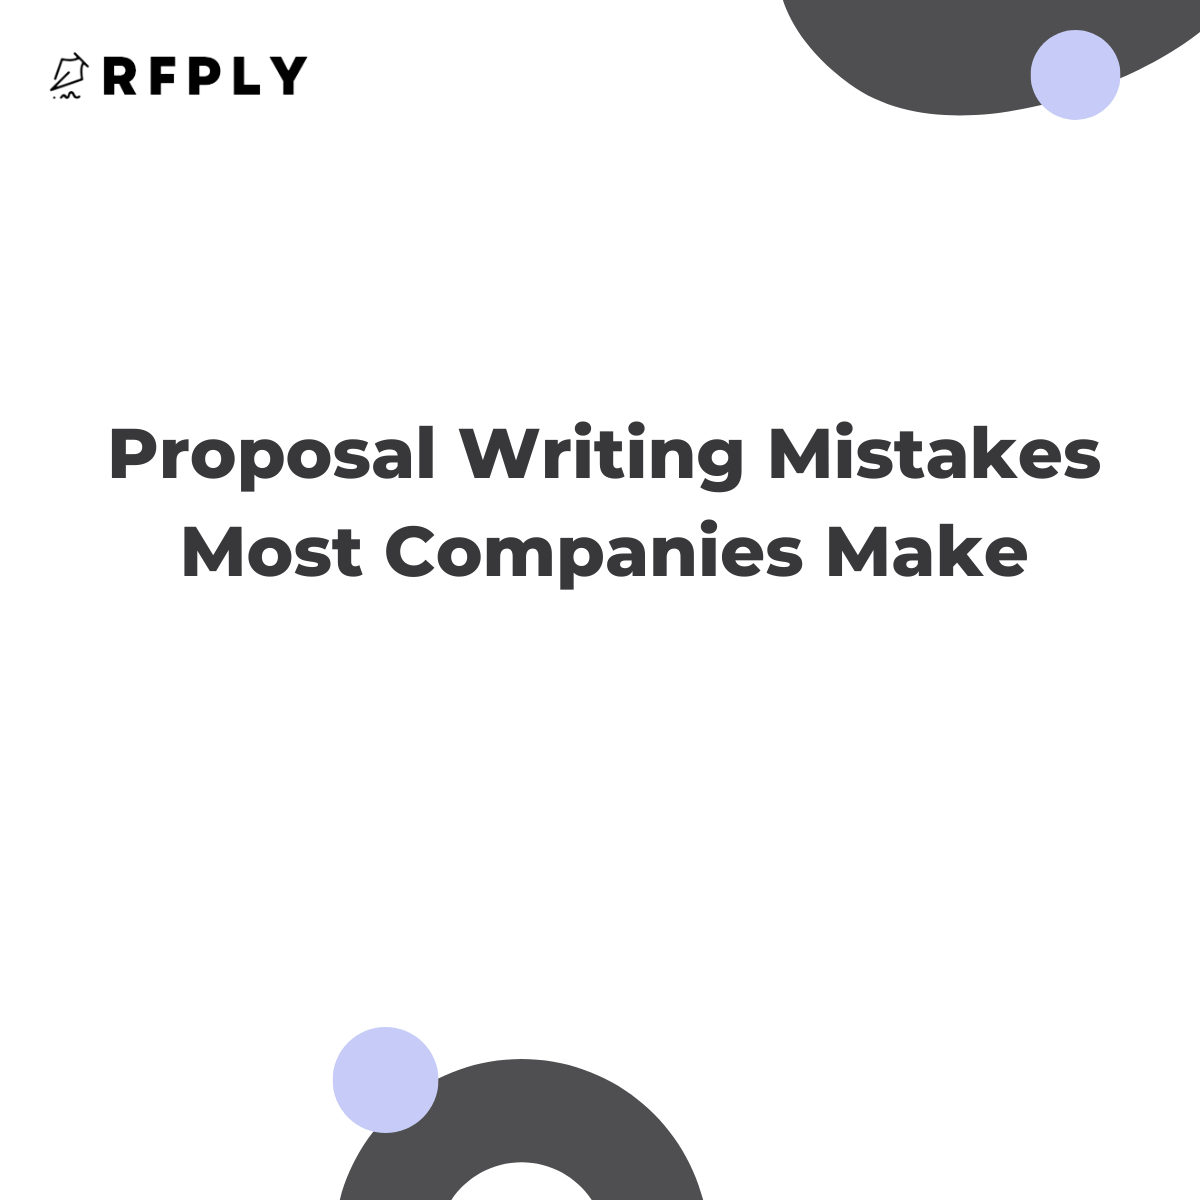 5 Proposal Writing Mistakes Most Companies Make